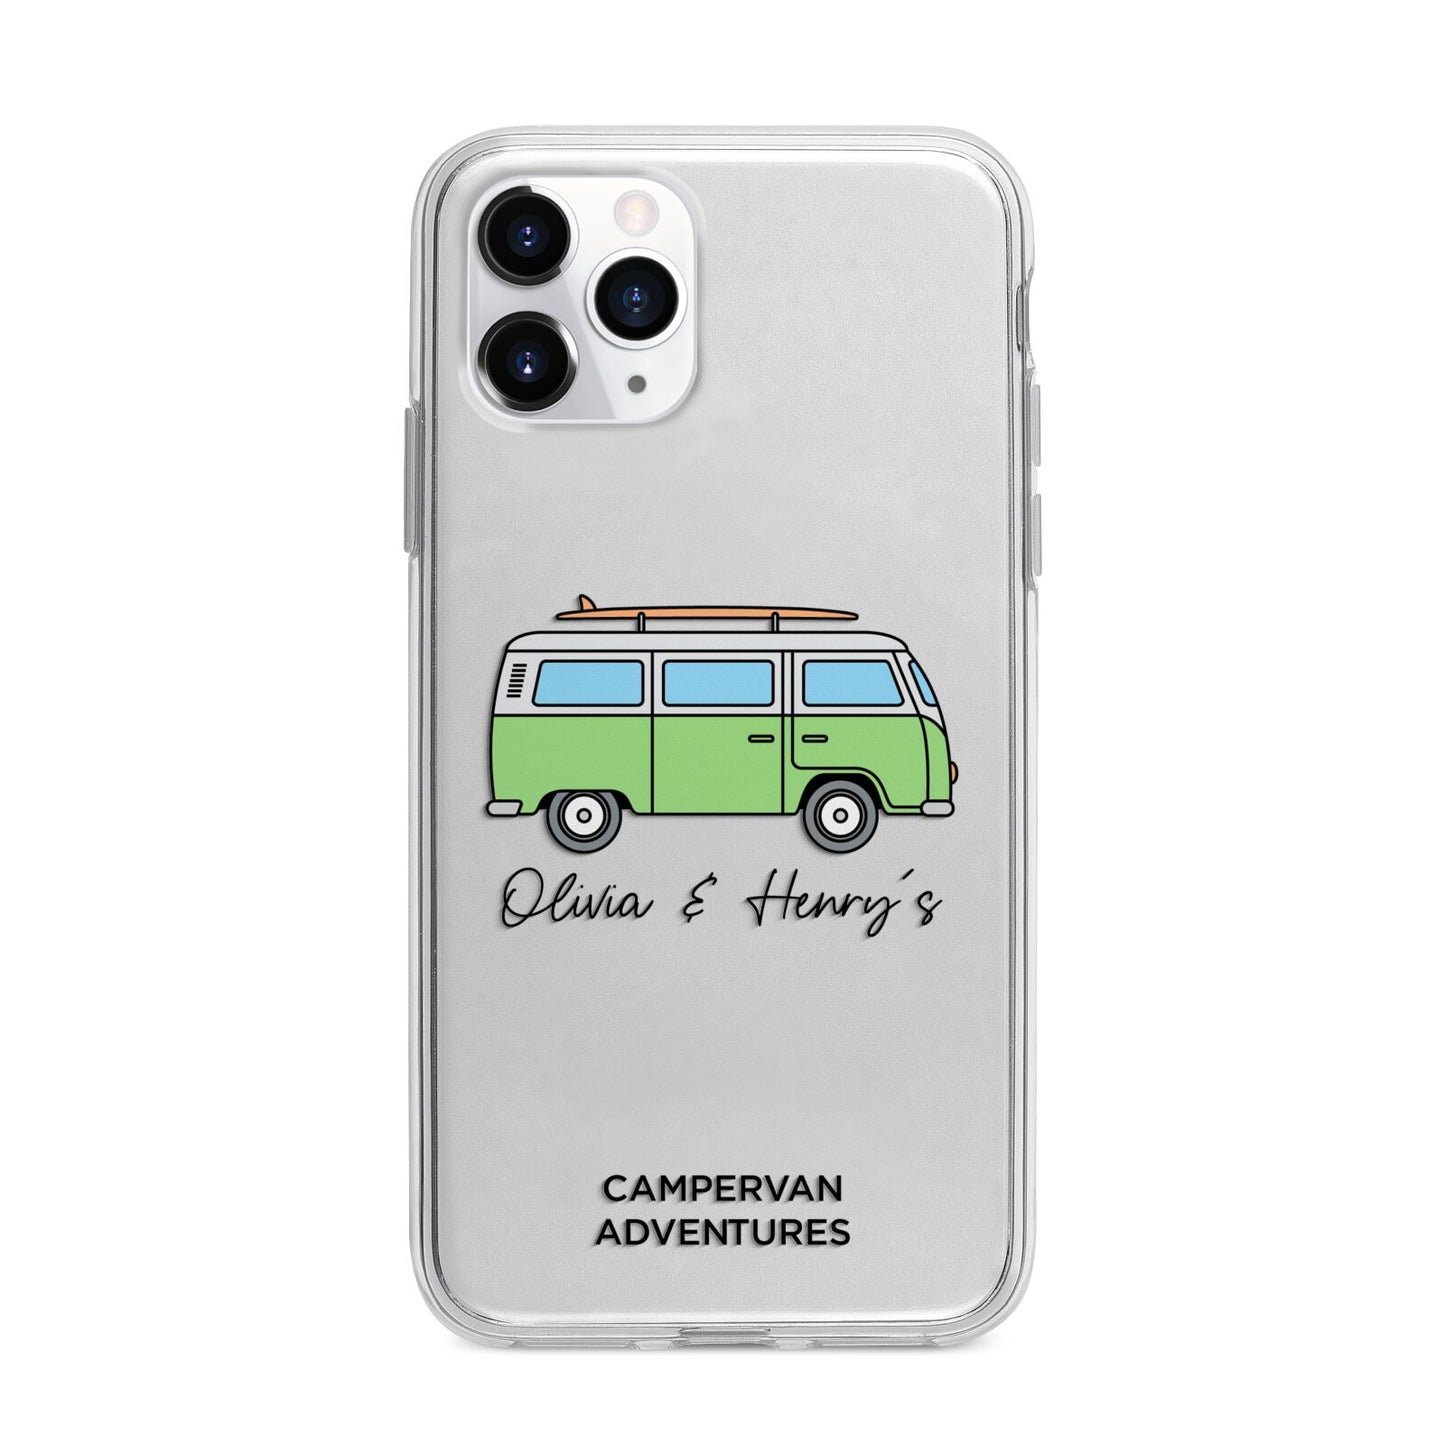 Green Bespoke Campervan Adventures Apple iPhone 11 Pro in Silver with Bumper Case